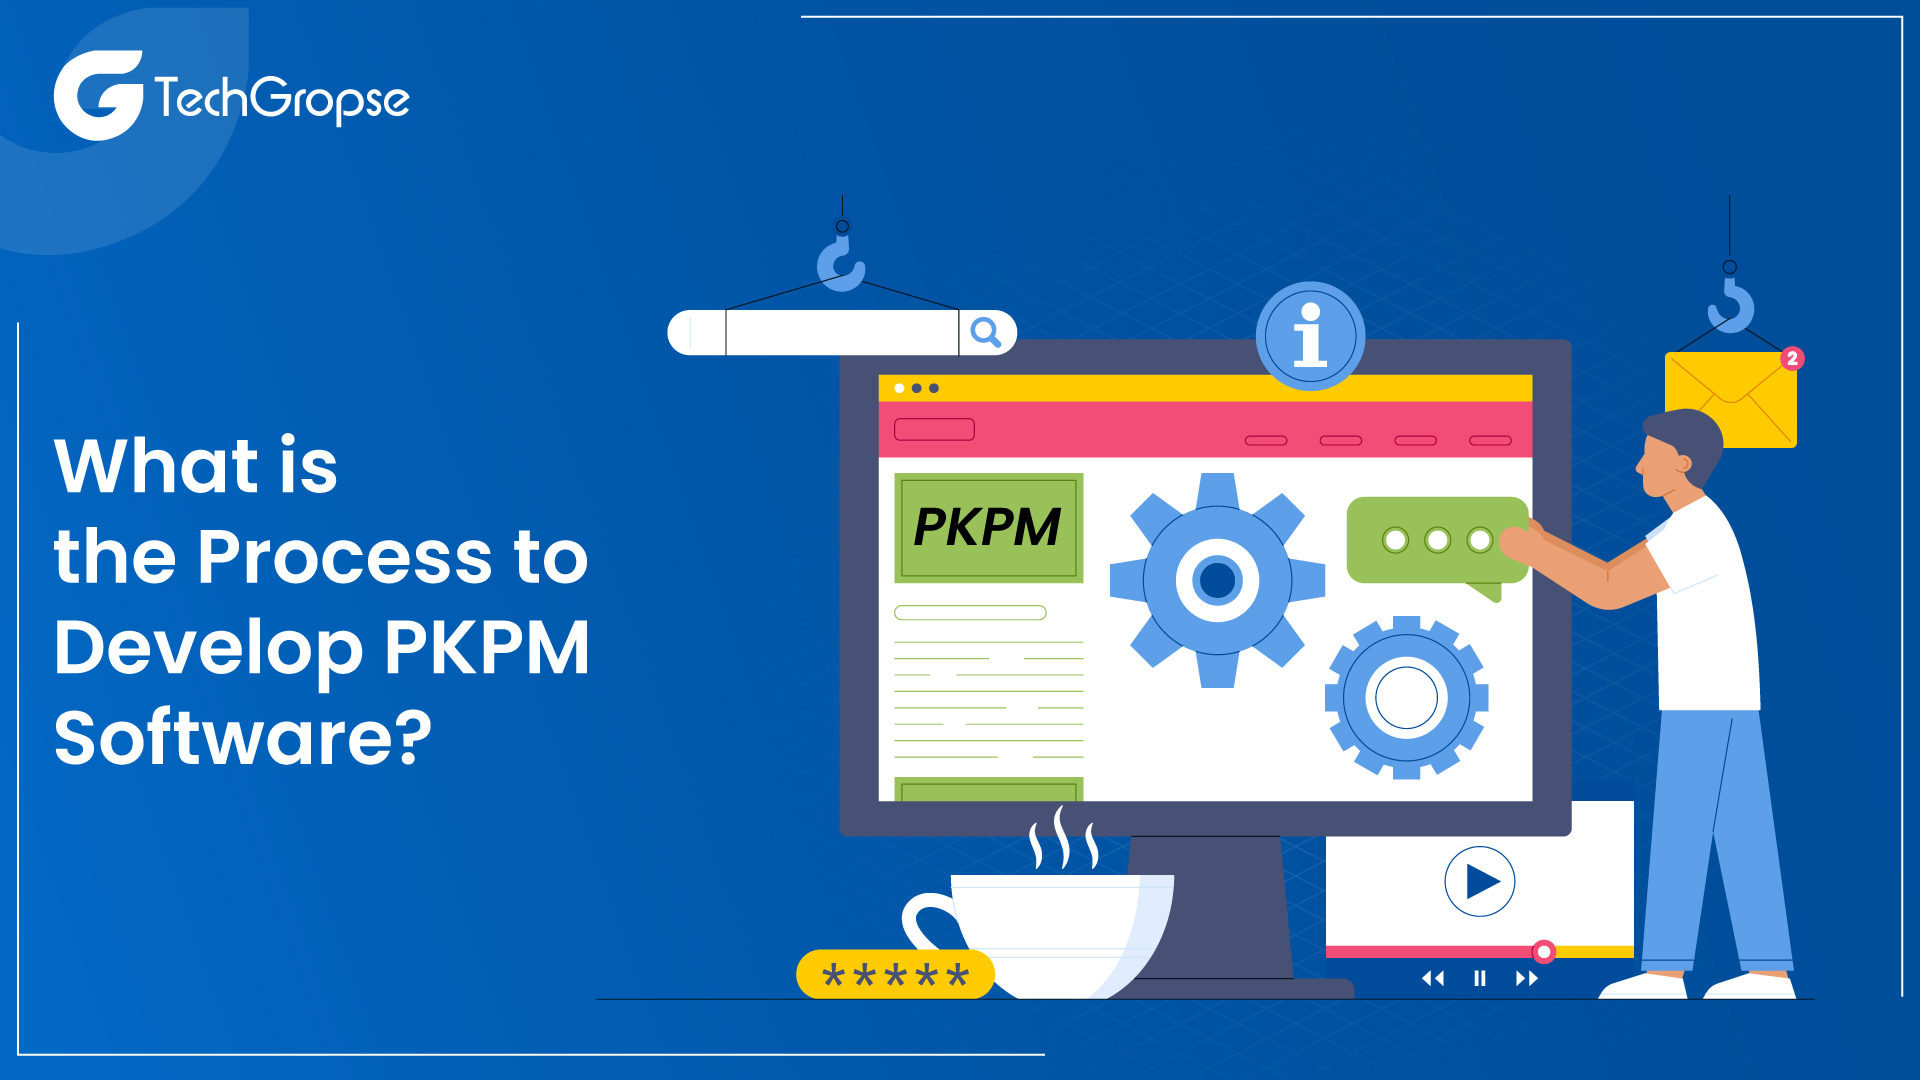 What is the Process to Develop PKPM Software?